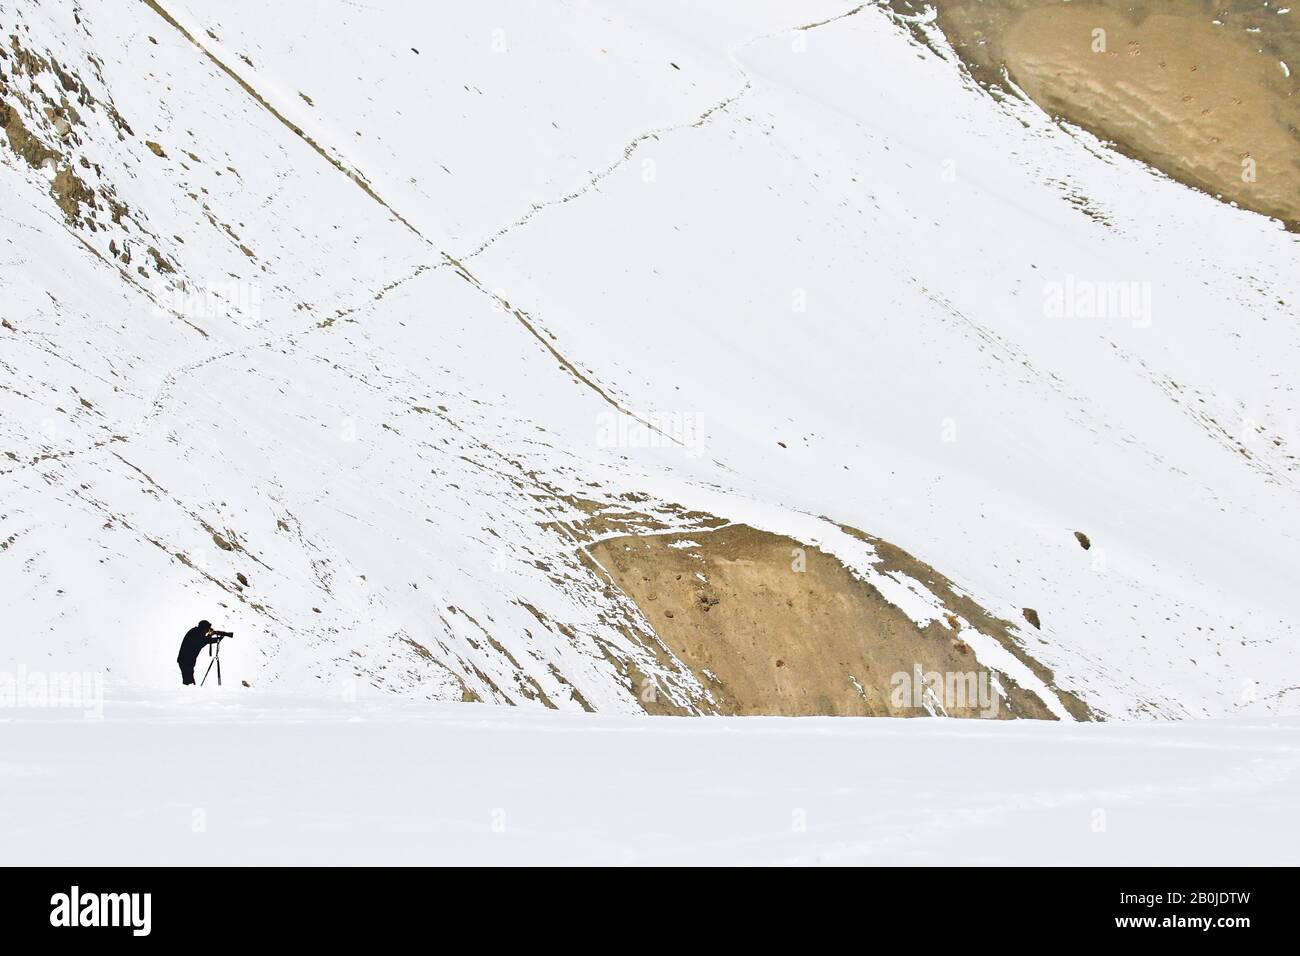 Photographer searching snow leopard in Rumbak valley. Ladakh. Himalayas. India Stock Photo